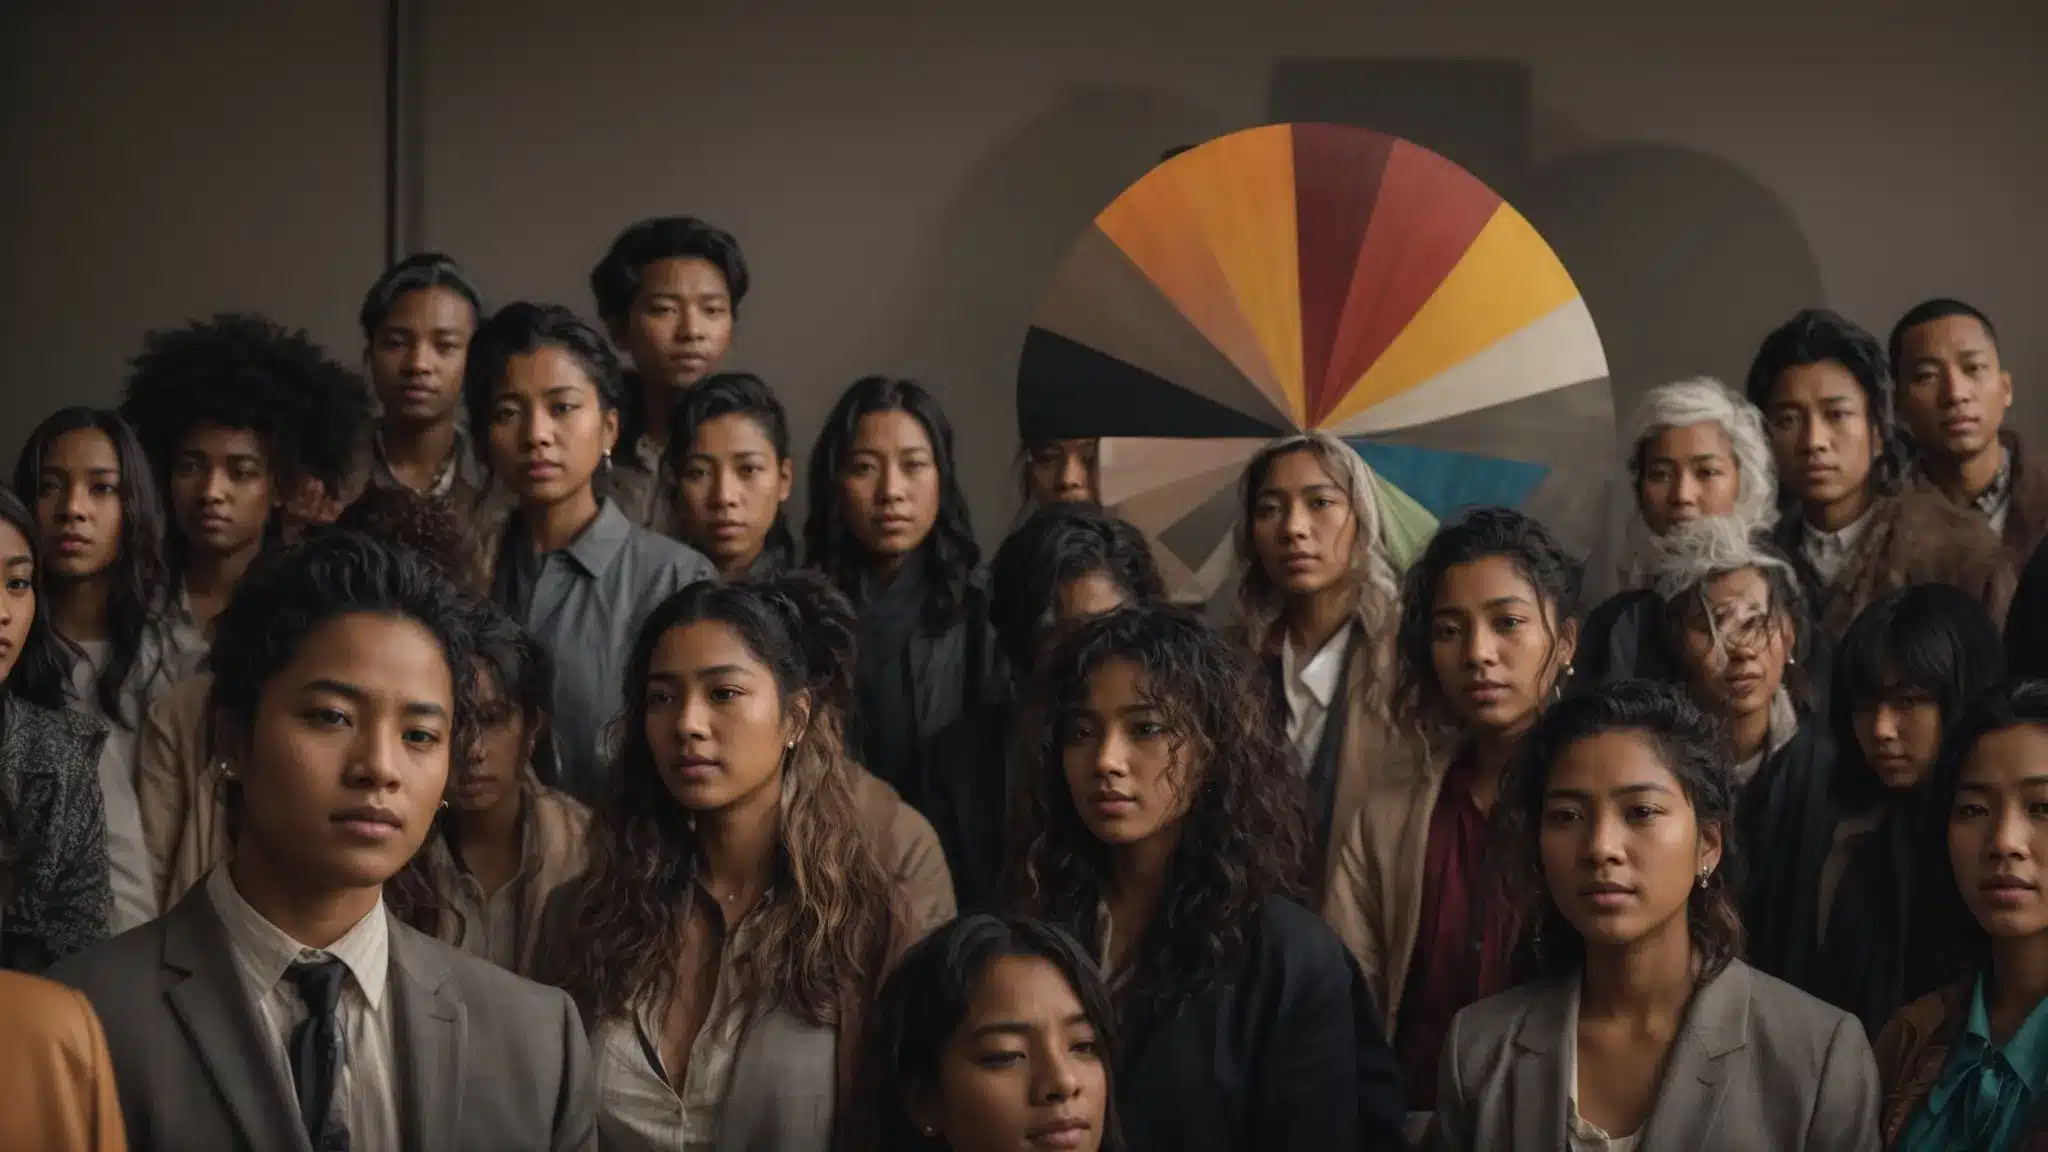 A Diverse Group Of People Representing Different Demographics Gathered Around An Interactive Display Showing A Pie Chart.